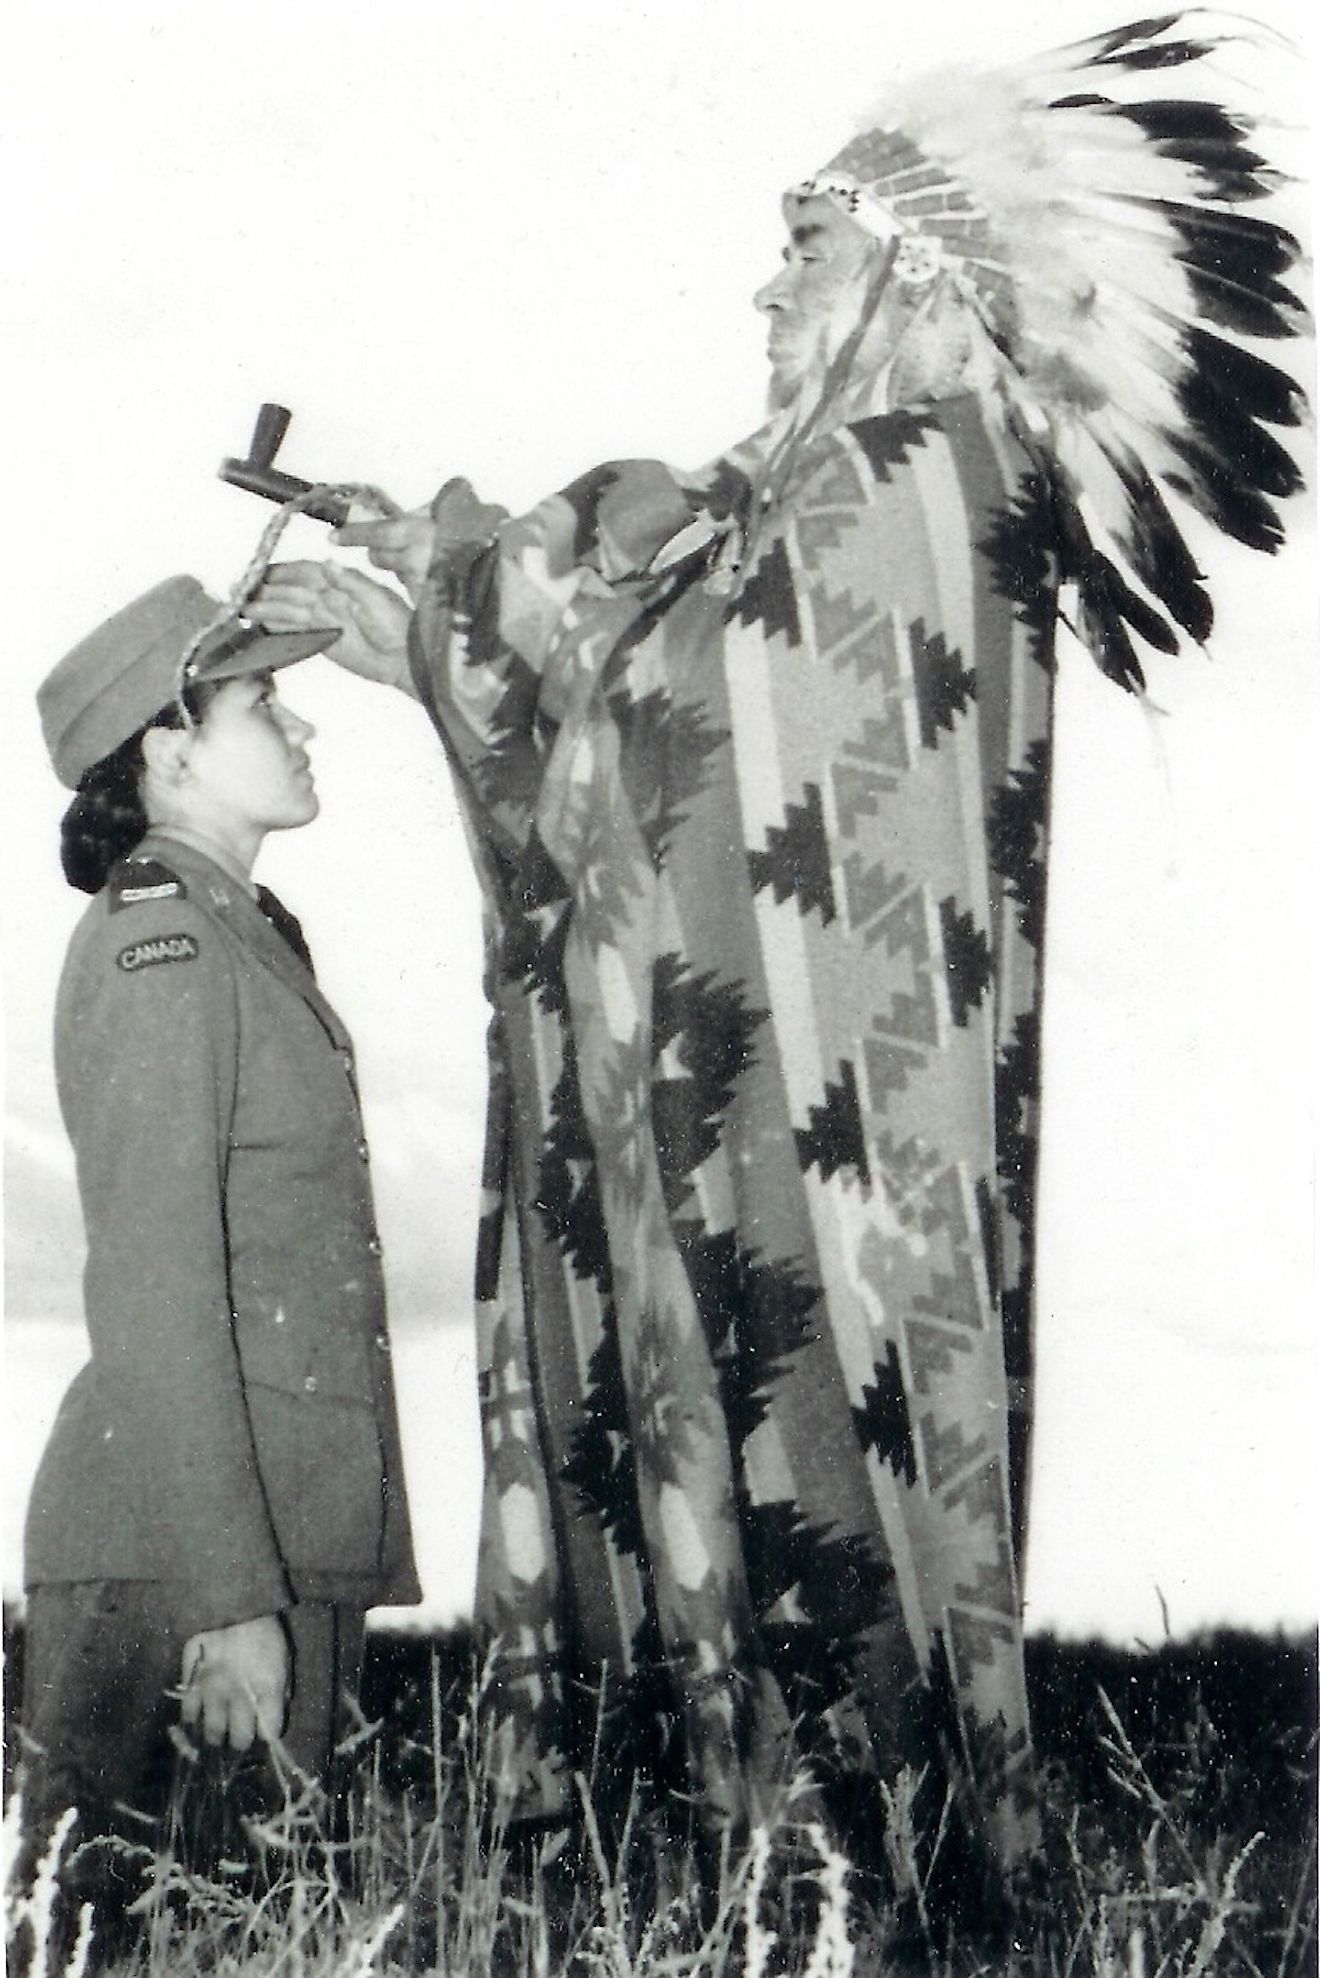 Mary Greyeyes, a Cree from Muskeg Lake Reserve, served in the Canadian Women’s Army Corps in Canada and Britain. In this staged Army publicity photograph, Greyeyes is seen with Harry Ball, a member of the Piapot First Nation dressed in the garb of a Plains Chief. Image credit: Canada. Dept. of National Defence/Library and Archives Canada